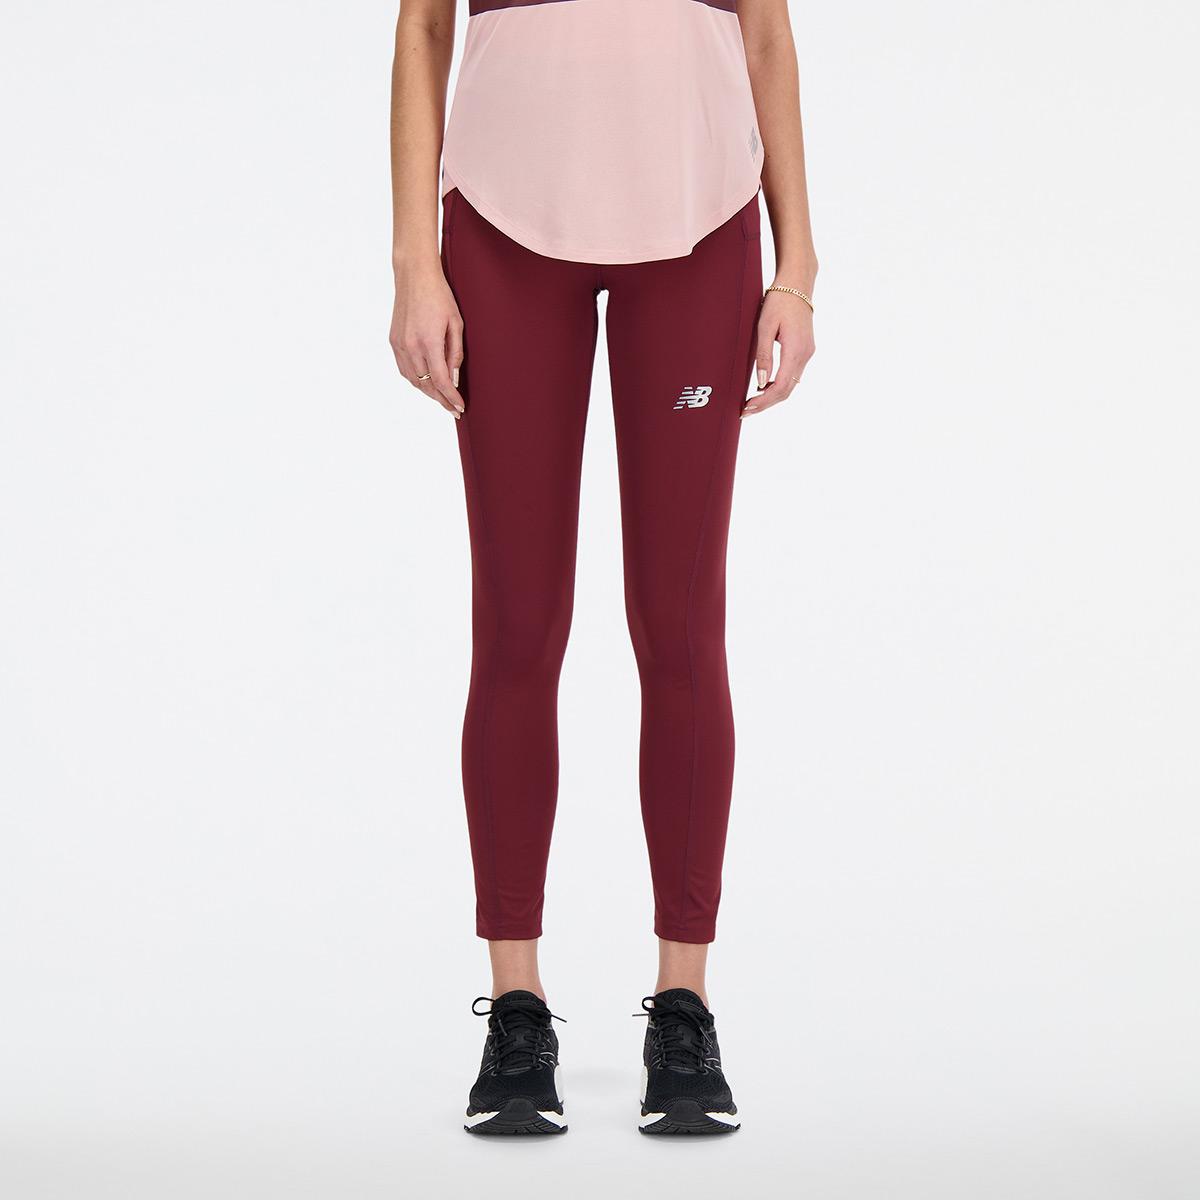 New Balance Womens Accelerate Pacer Tights - Nb Burgundy